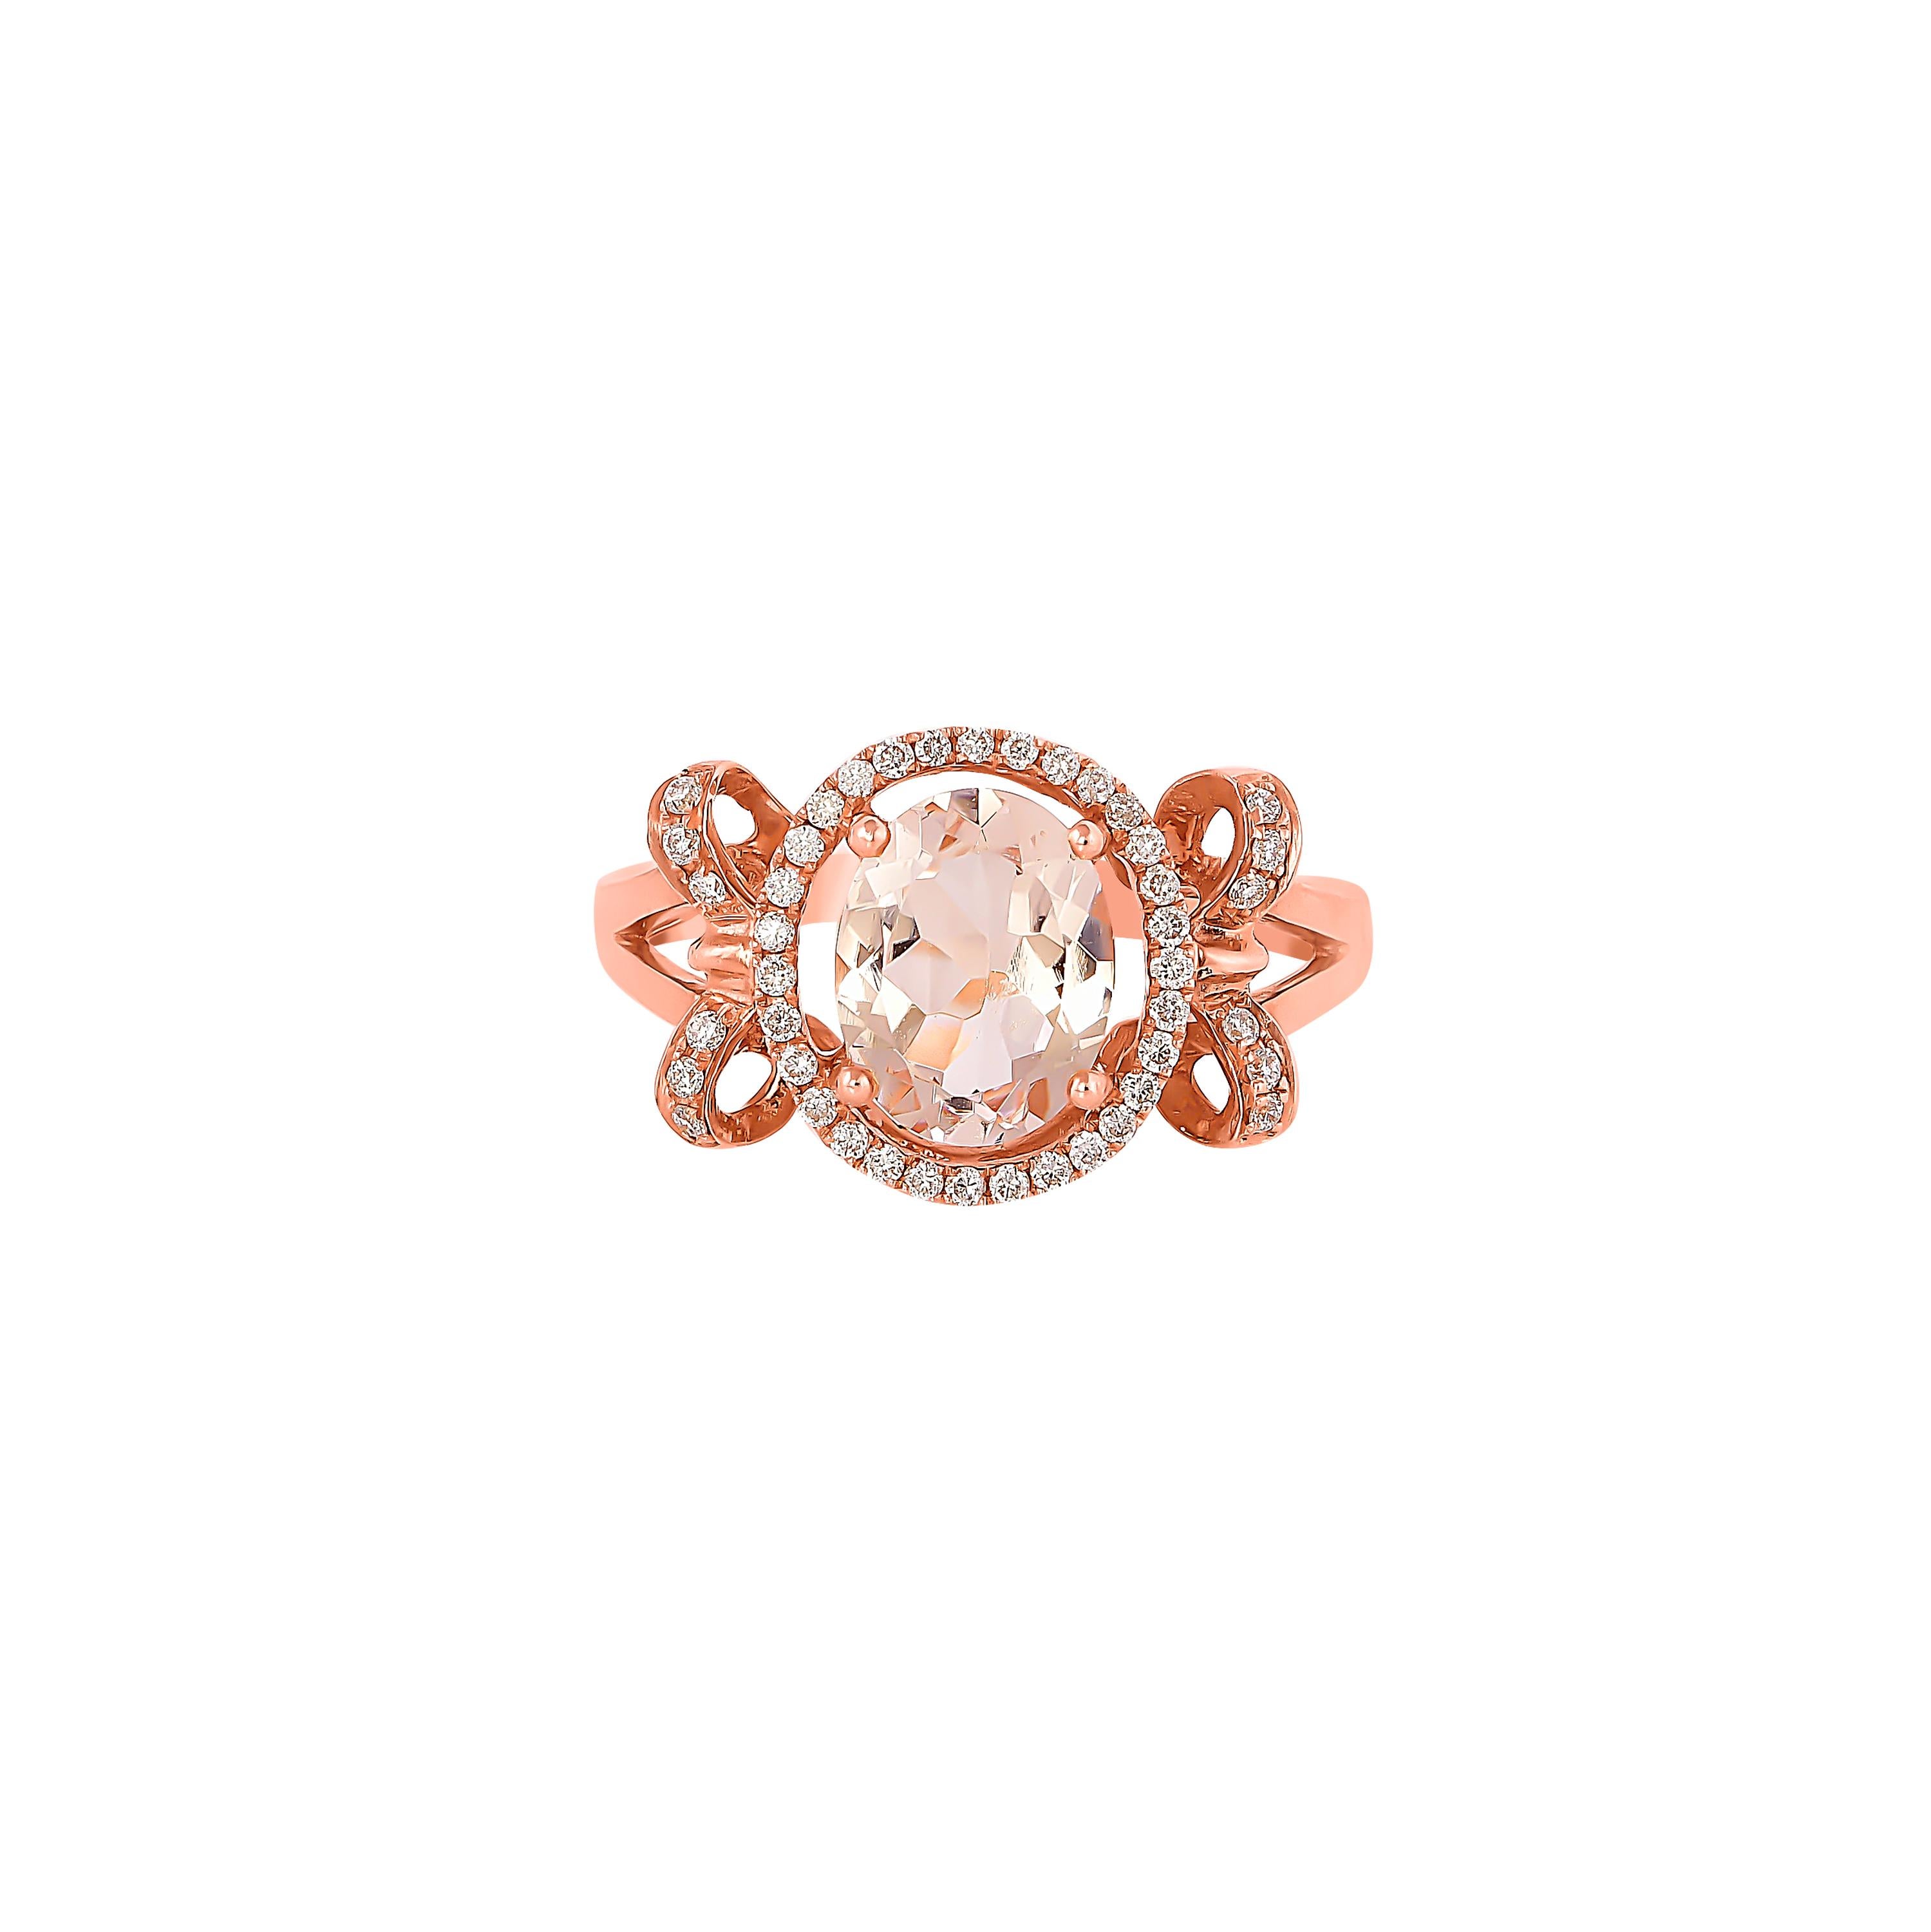 Contemporary 1.62 Carat Morganite and Diamond Ring in 18 Karat Rose Gold For Sale